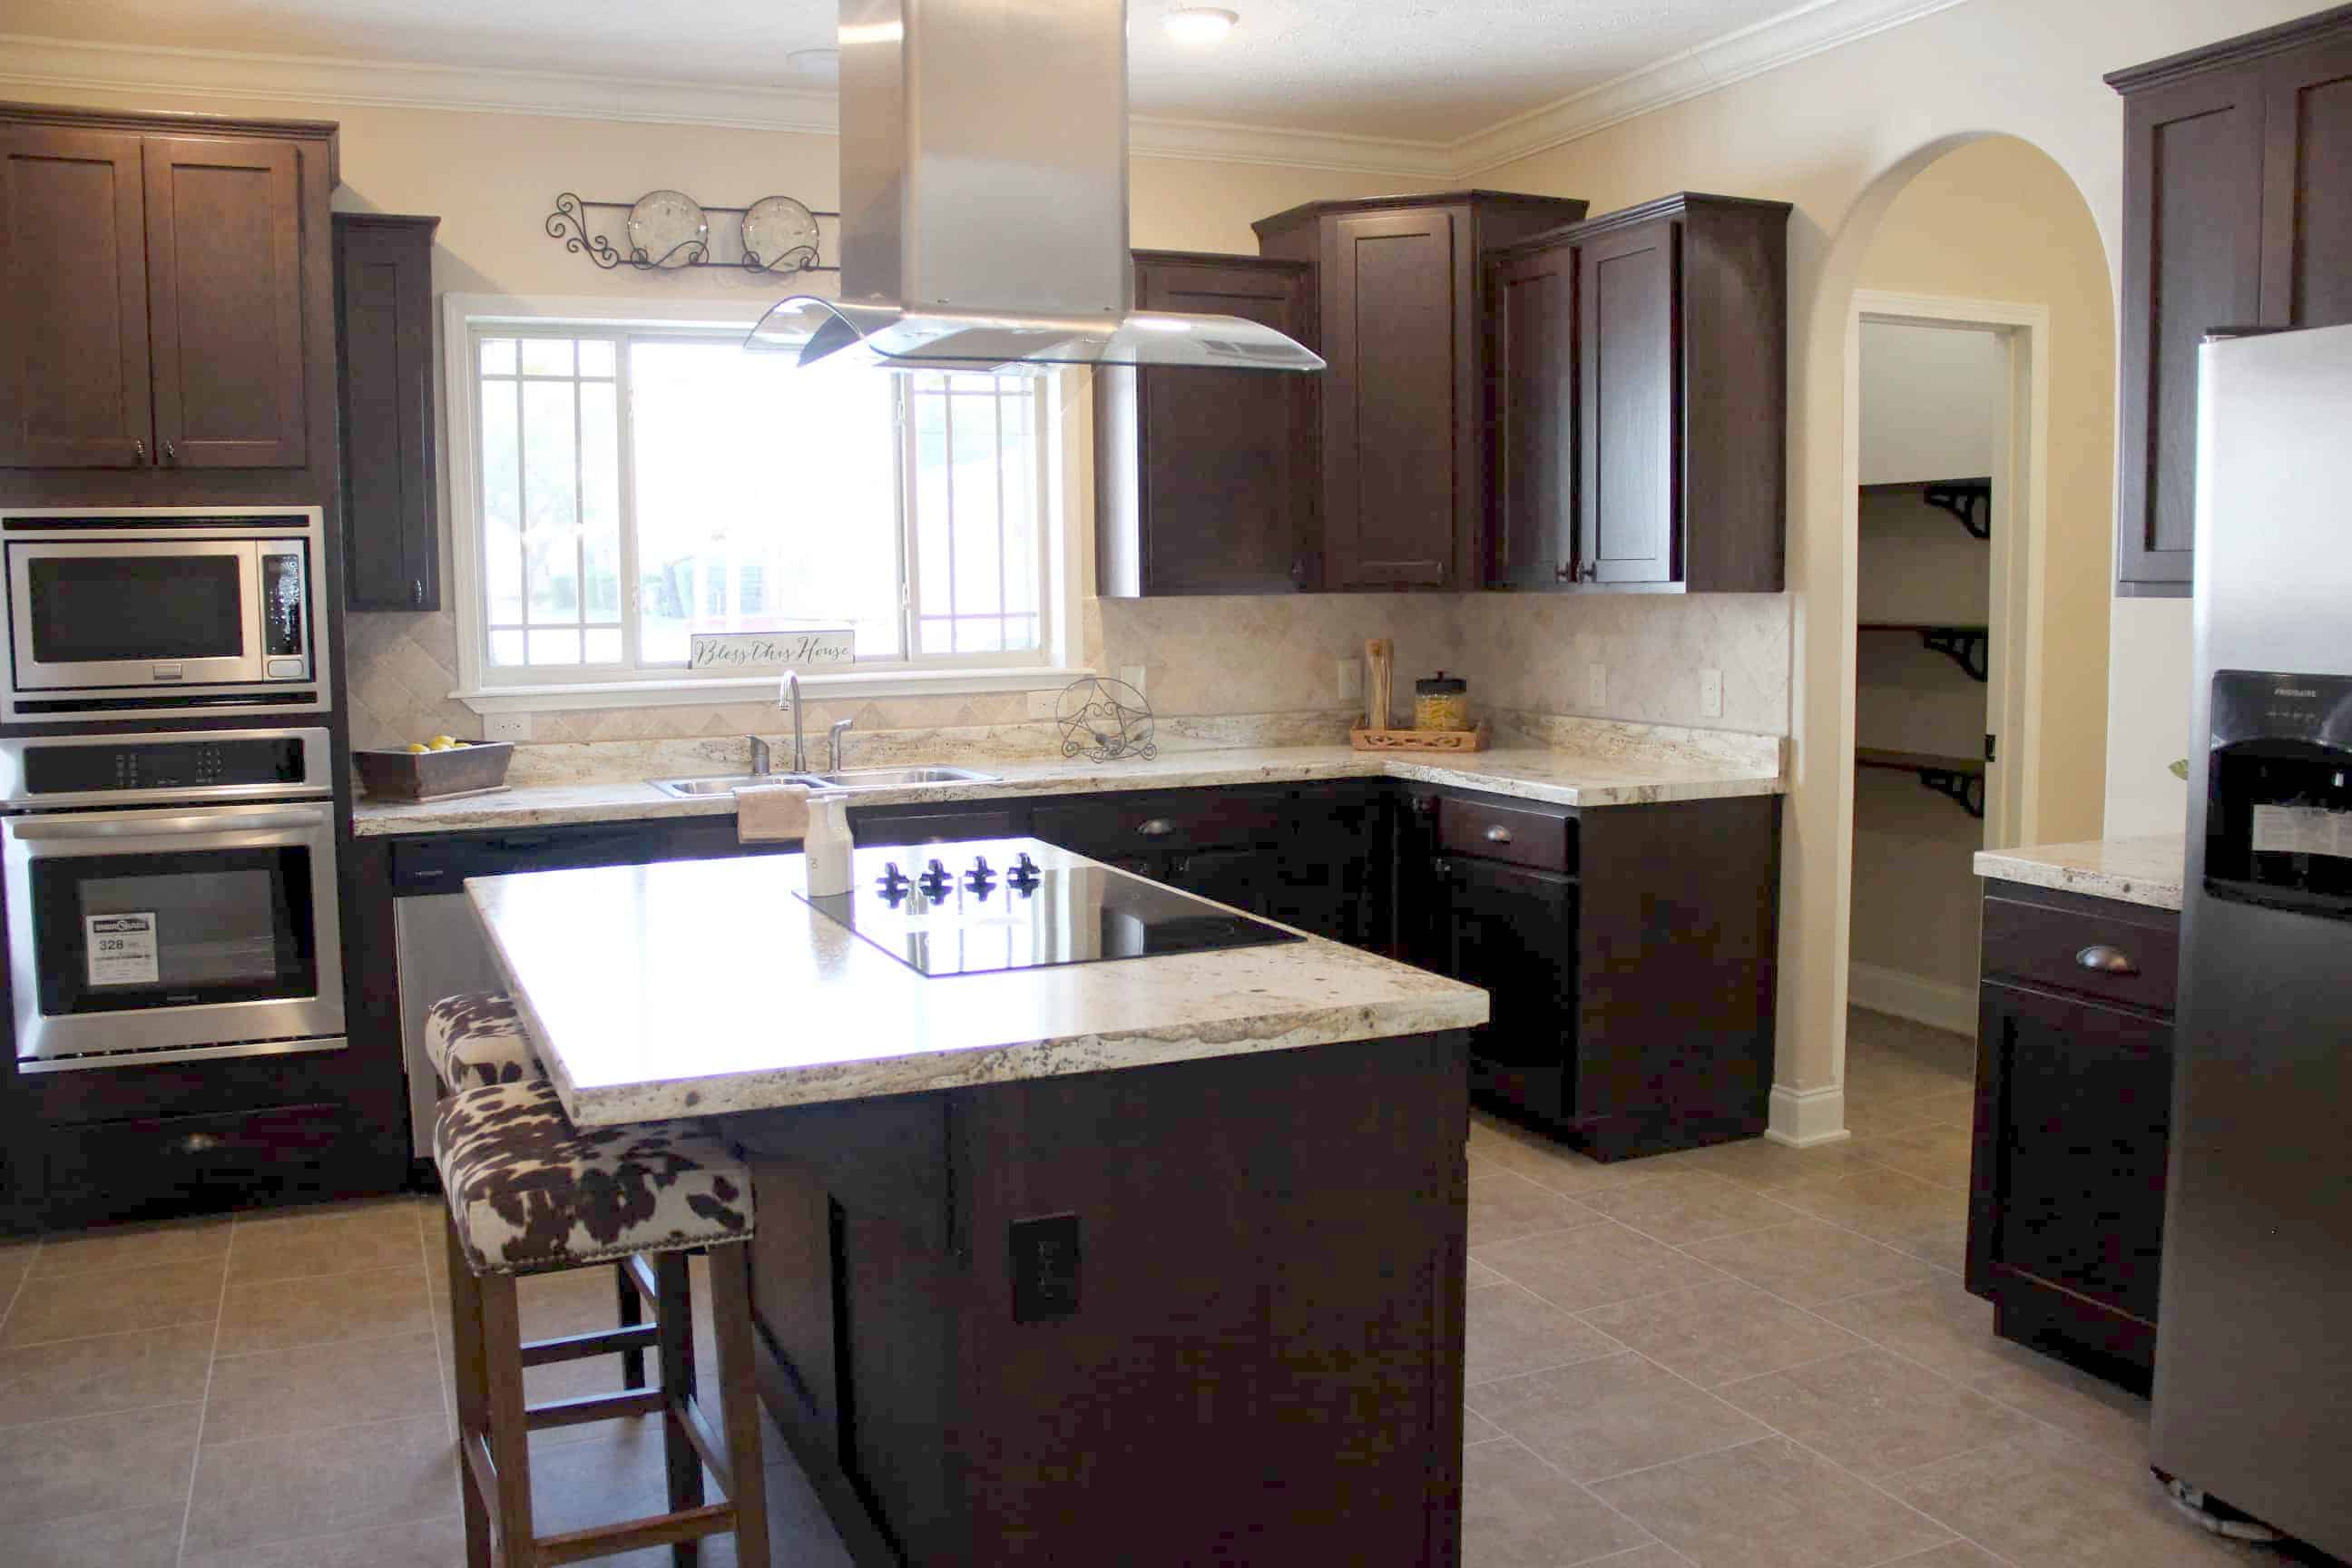 Kitchen space from home model Carlton made by Pratt Homes, Tyler, Texas